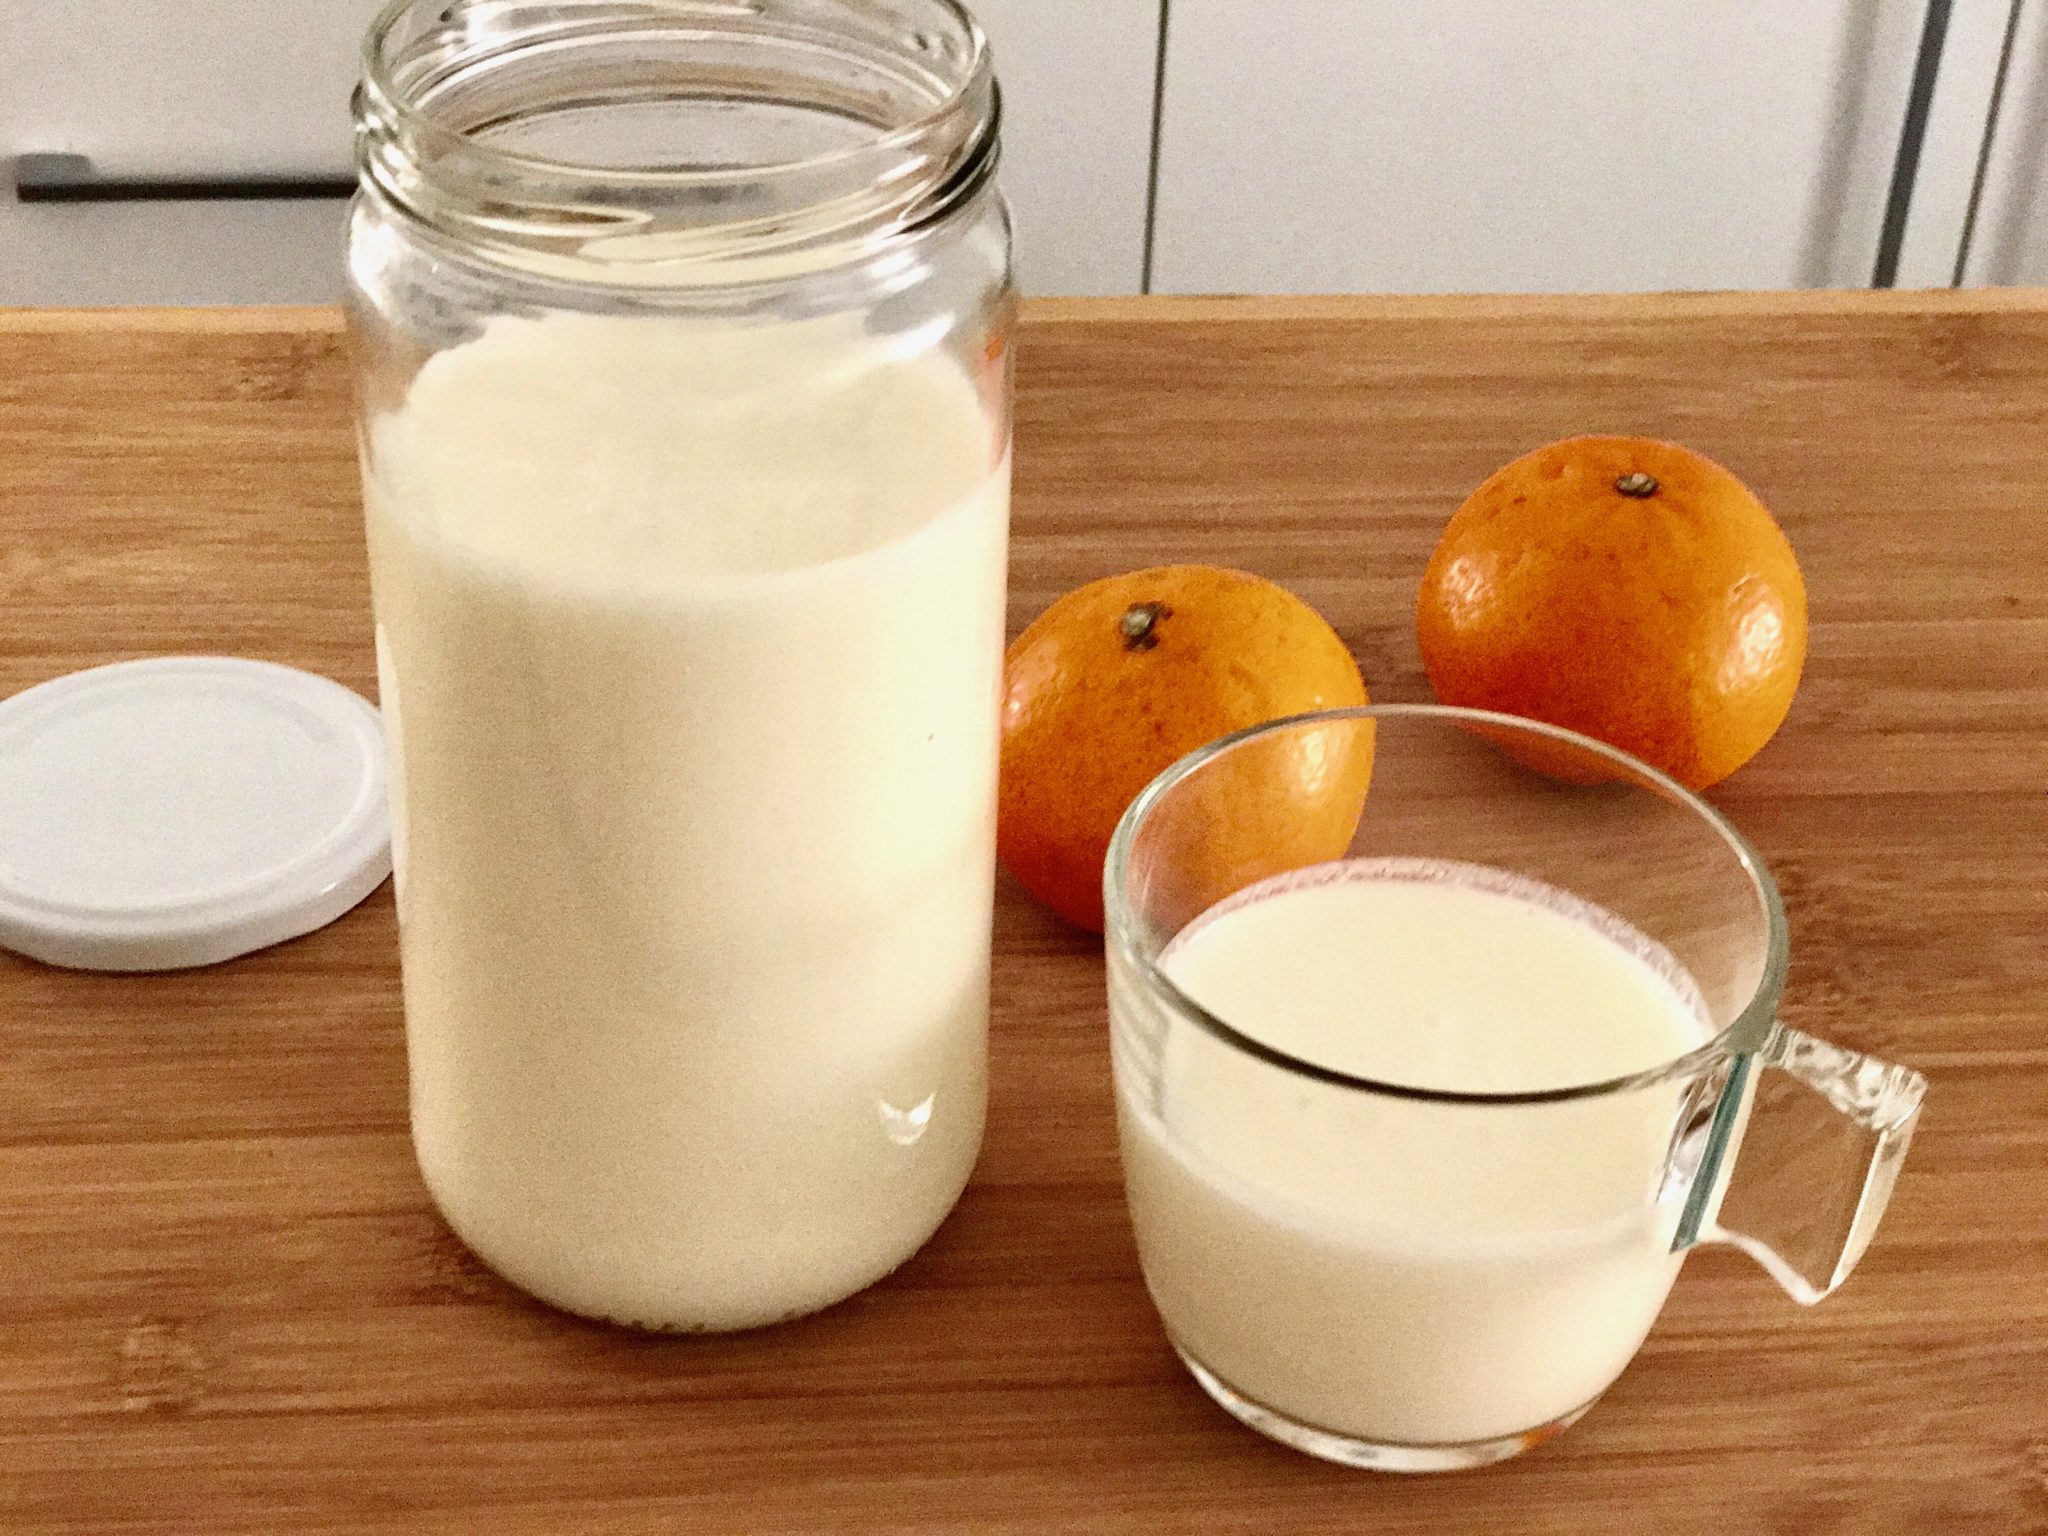 How to make Milk Kefir: A probiotic rich drink made easy